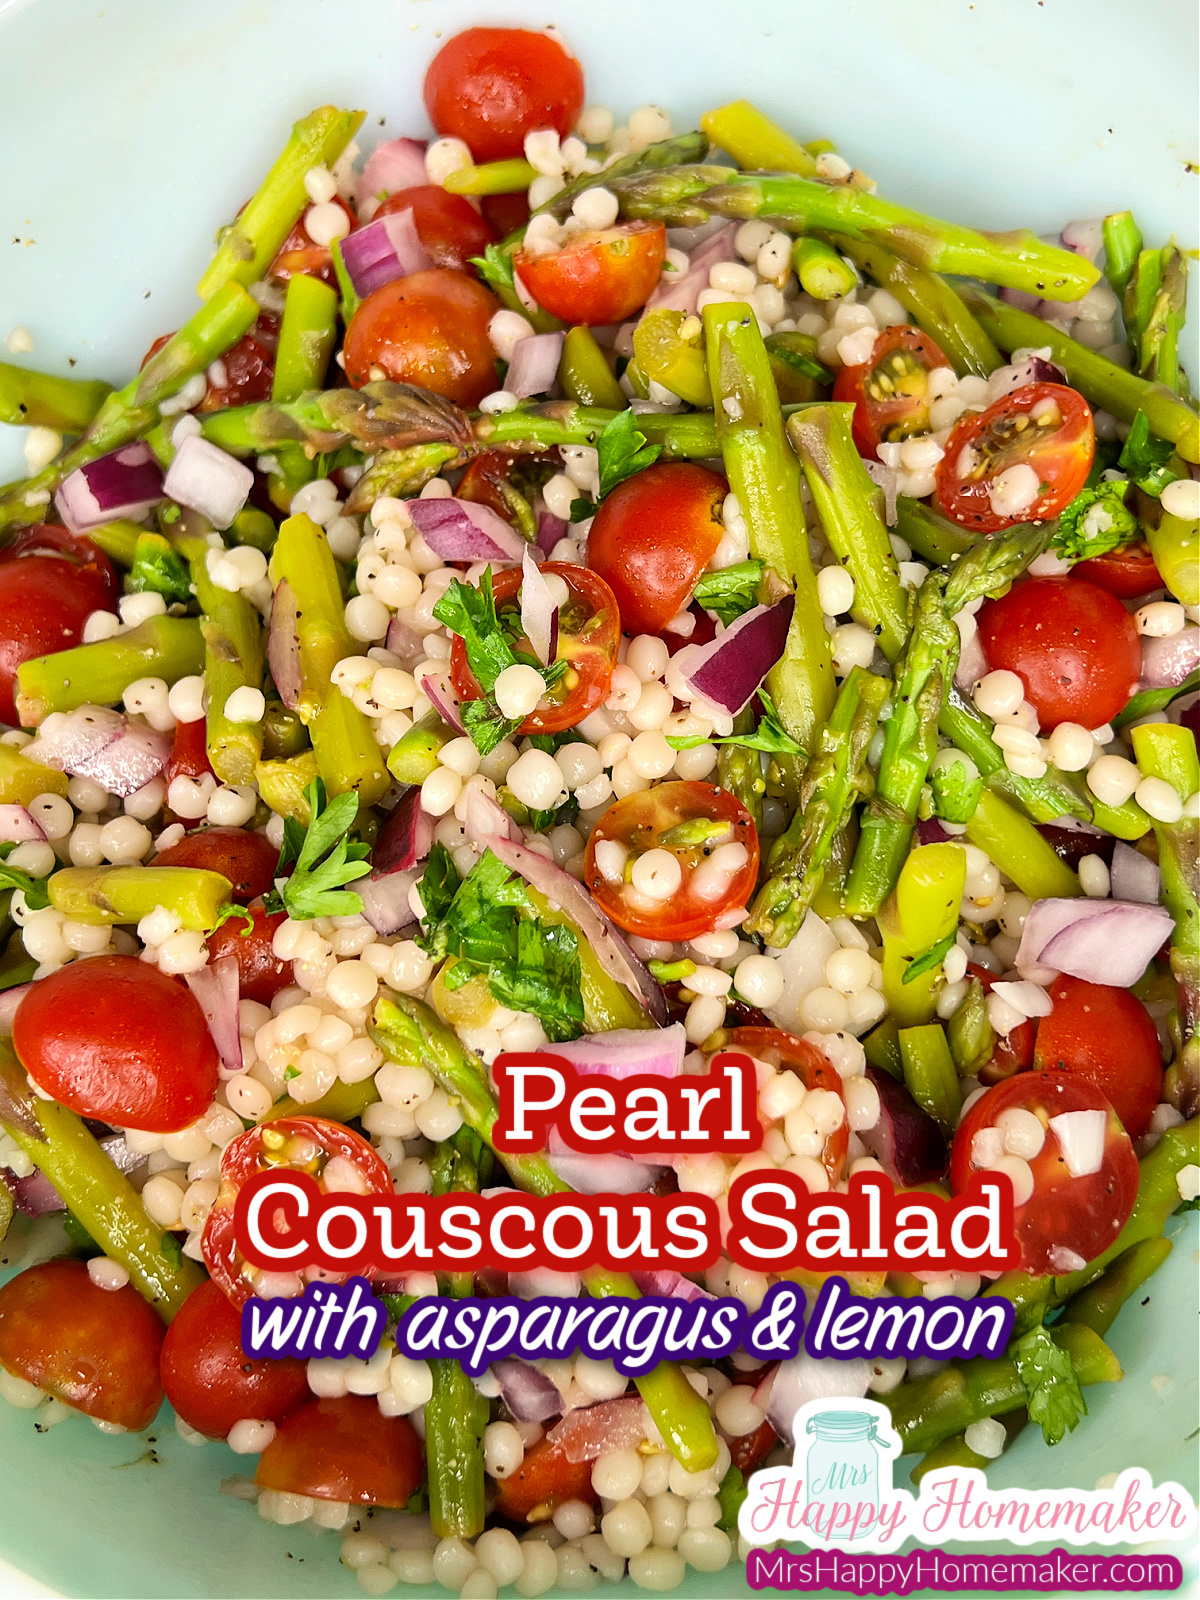 Closeup of pearl couscous salad with asparagus & cherry tomatoes in a bowl